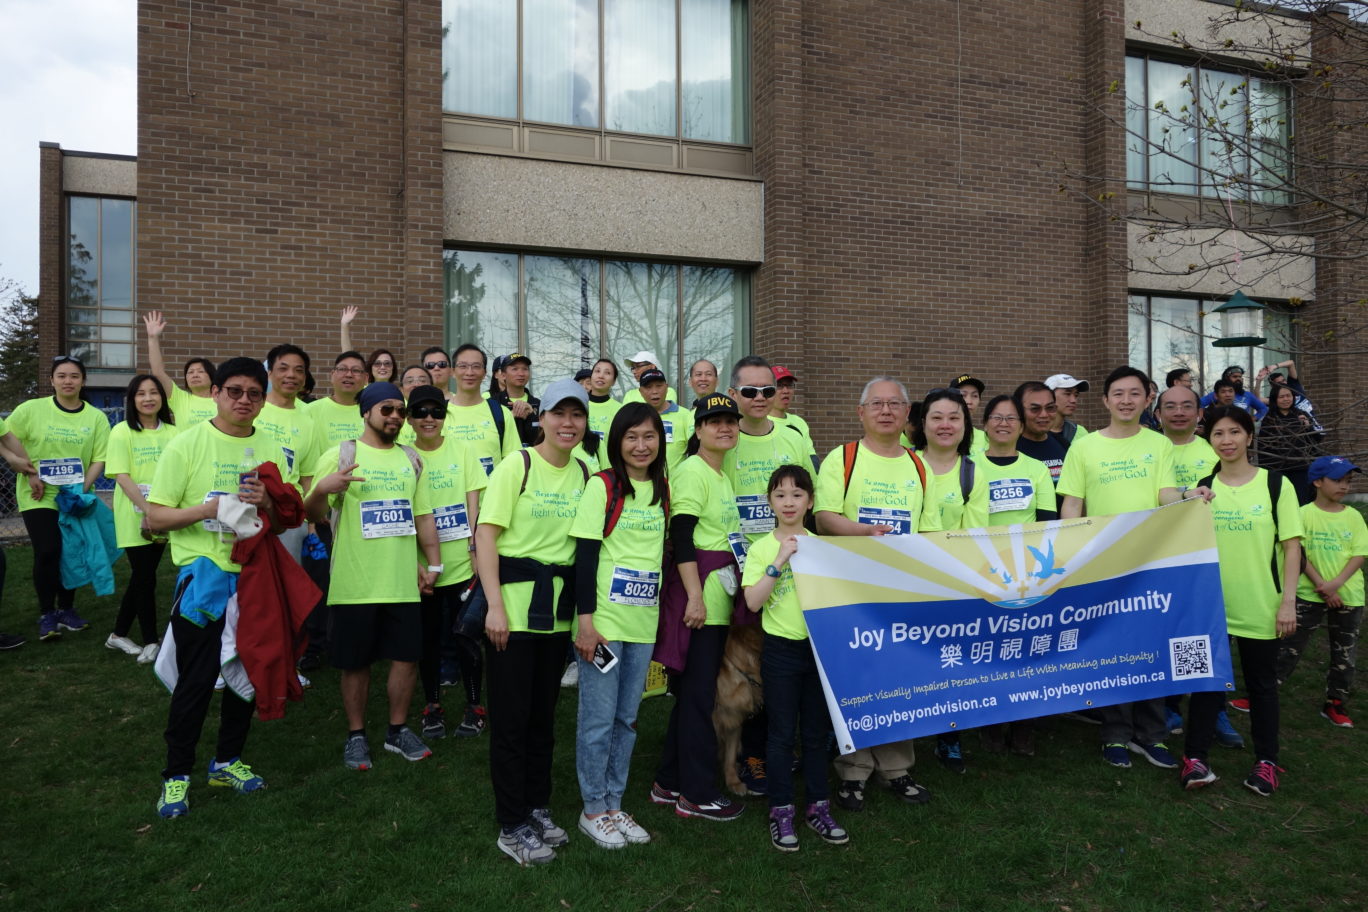 Group photo of 5k participants at the starting location with JBVC banner